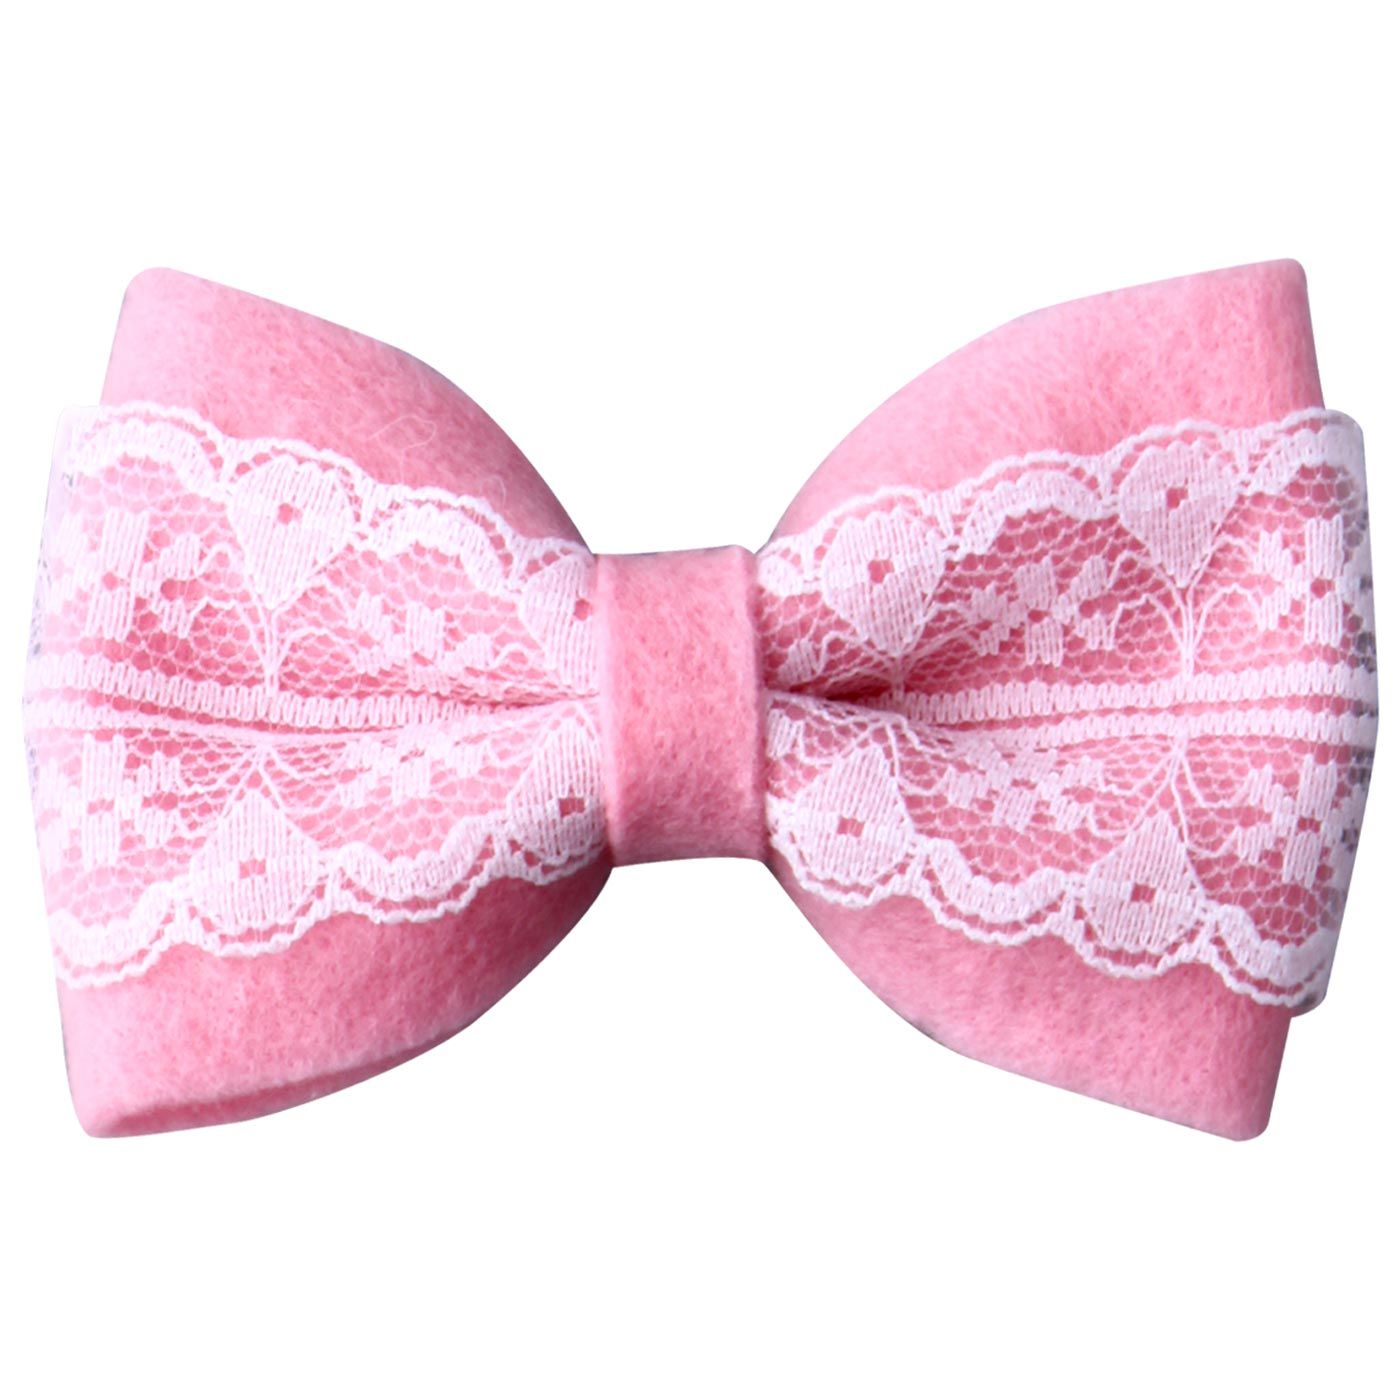 Bebecroc Double Layer Bow w/lace Pale Pink - 2